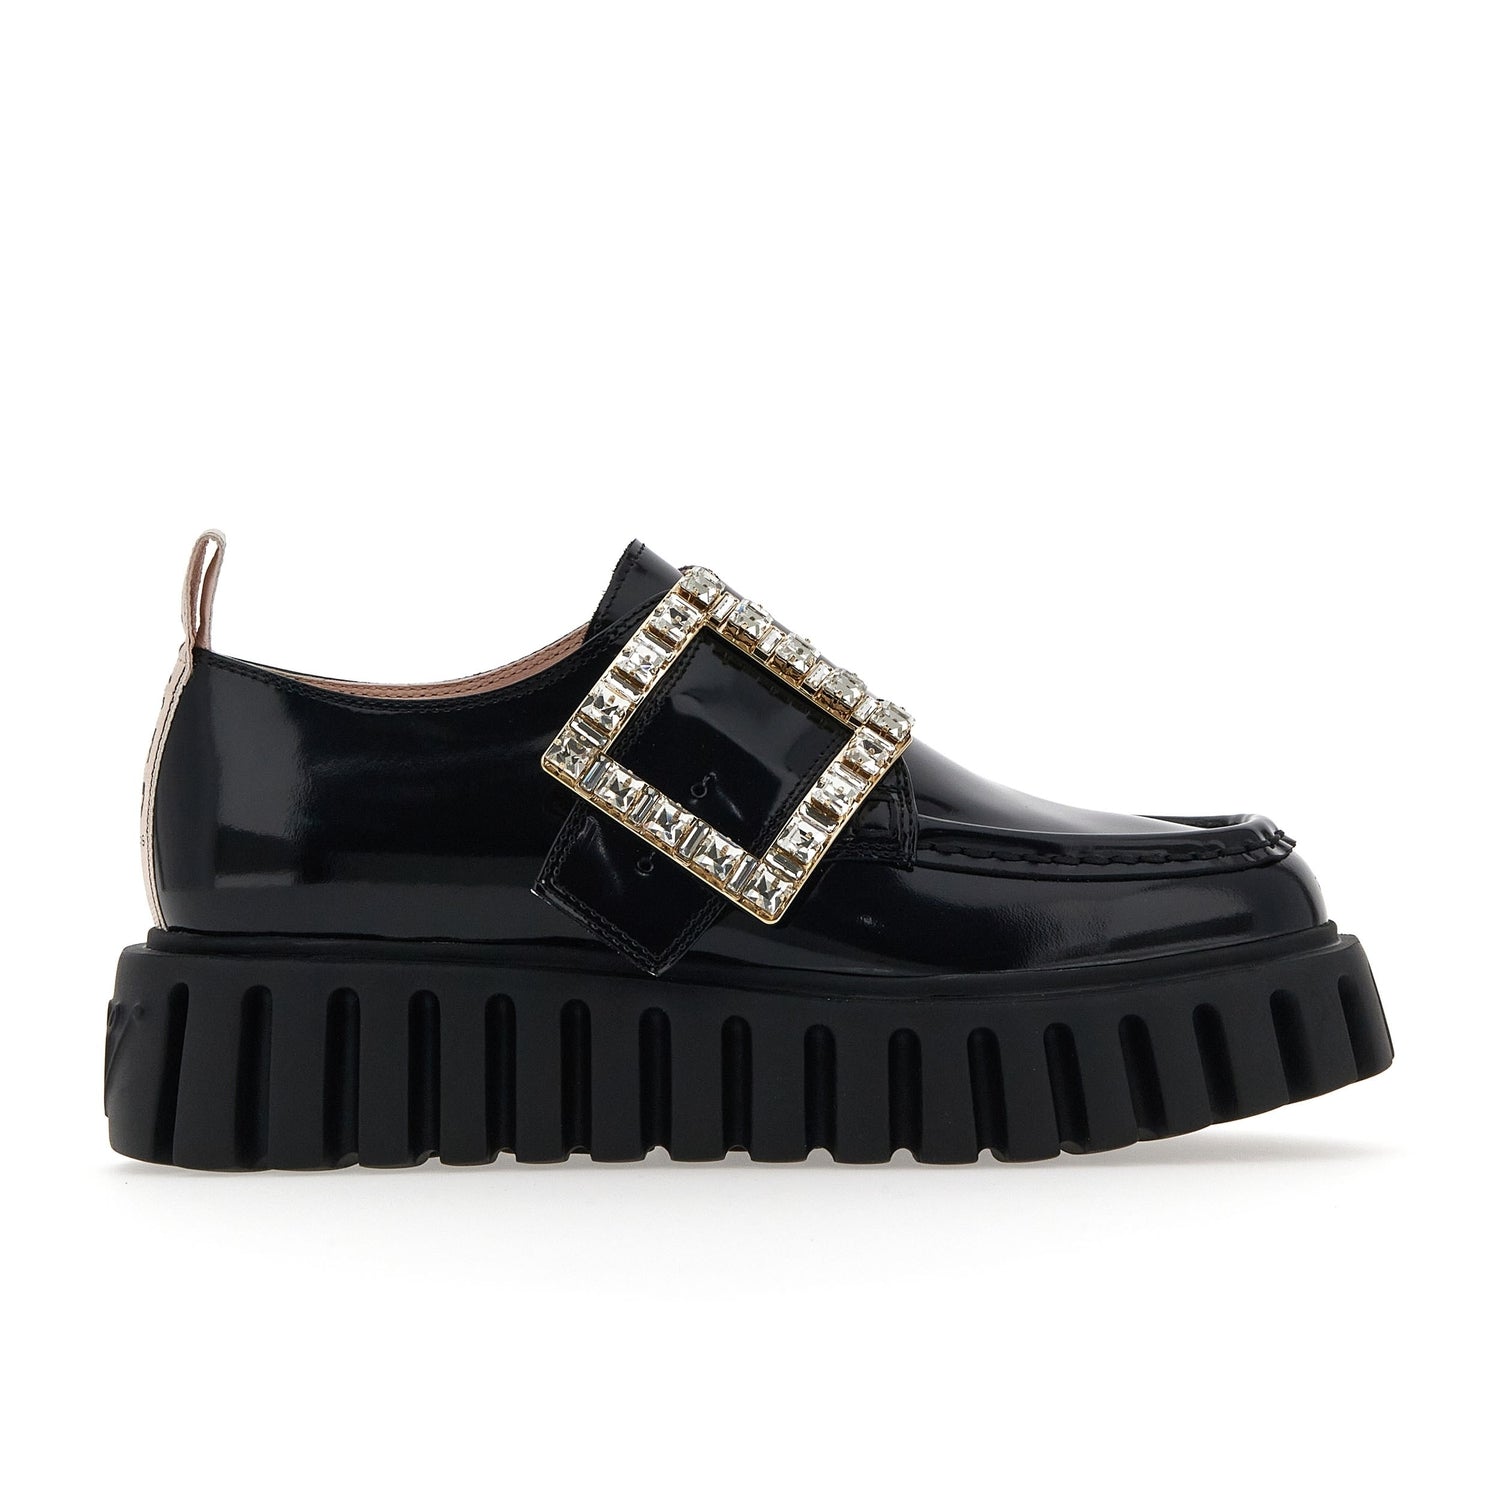 Viv’ Go-Thick Strass Buckle Loafers in Patent Leather